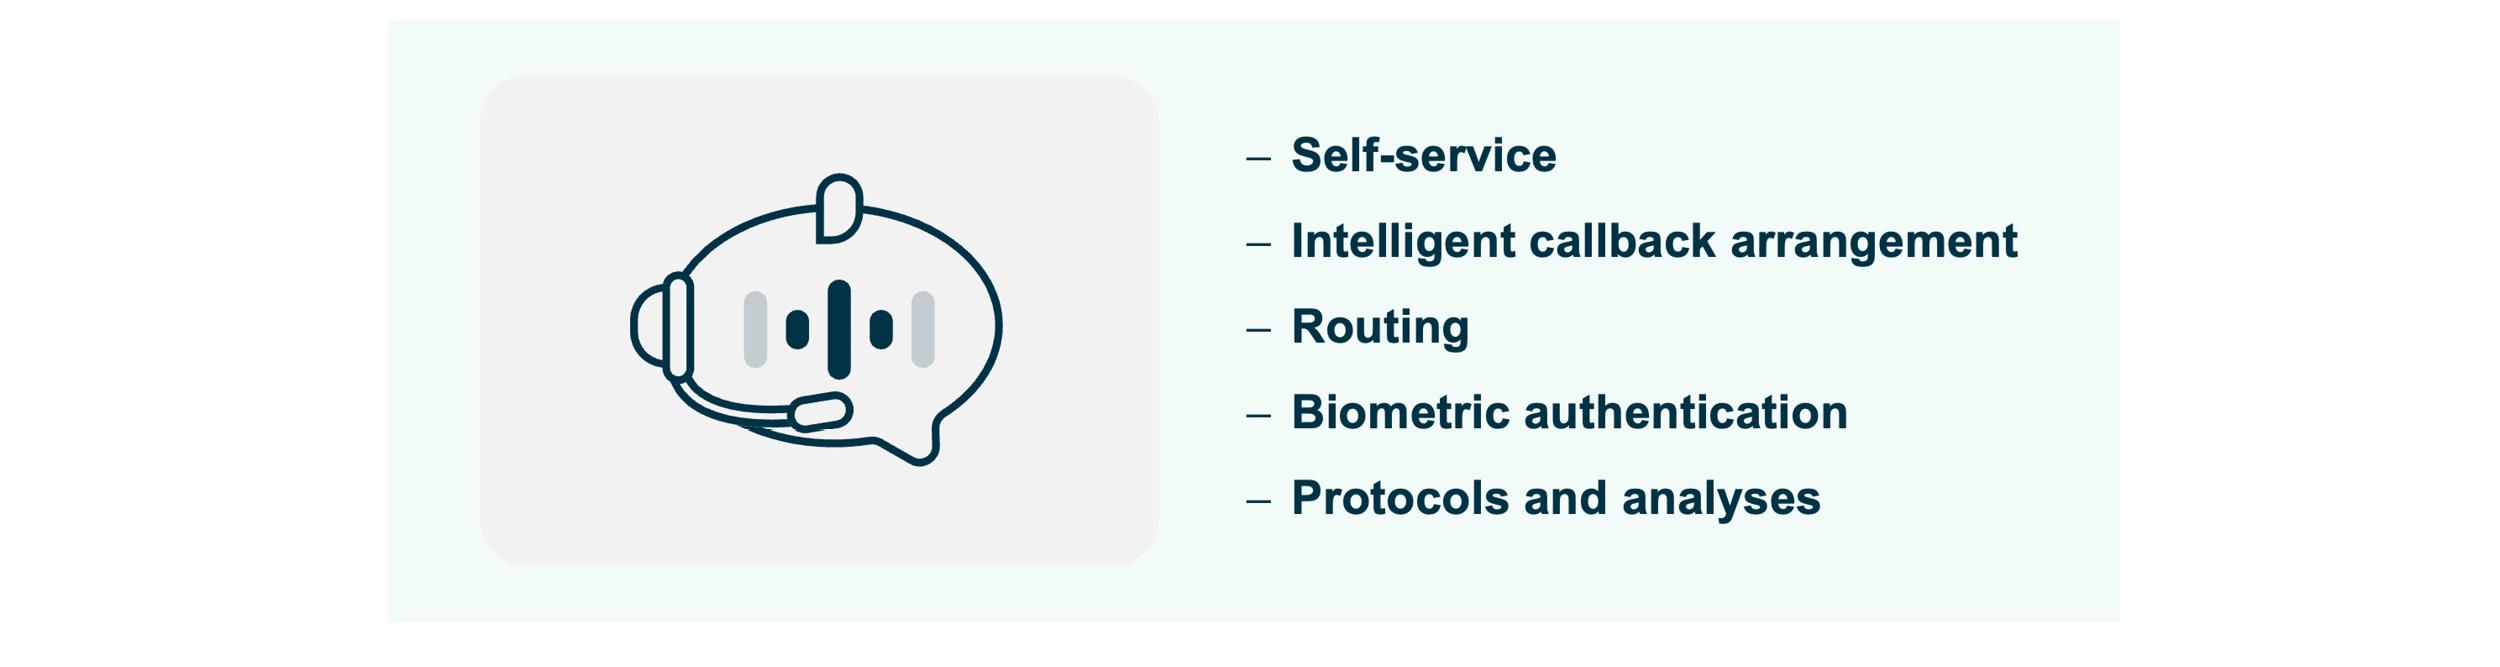 A visual presentation of the main functions of a voicebot